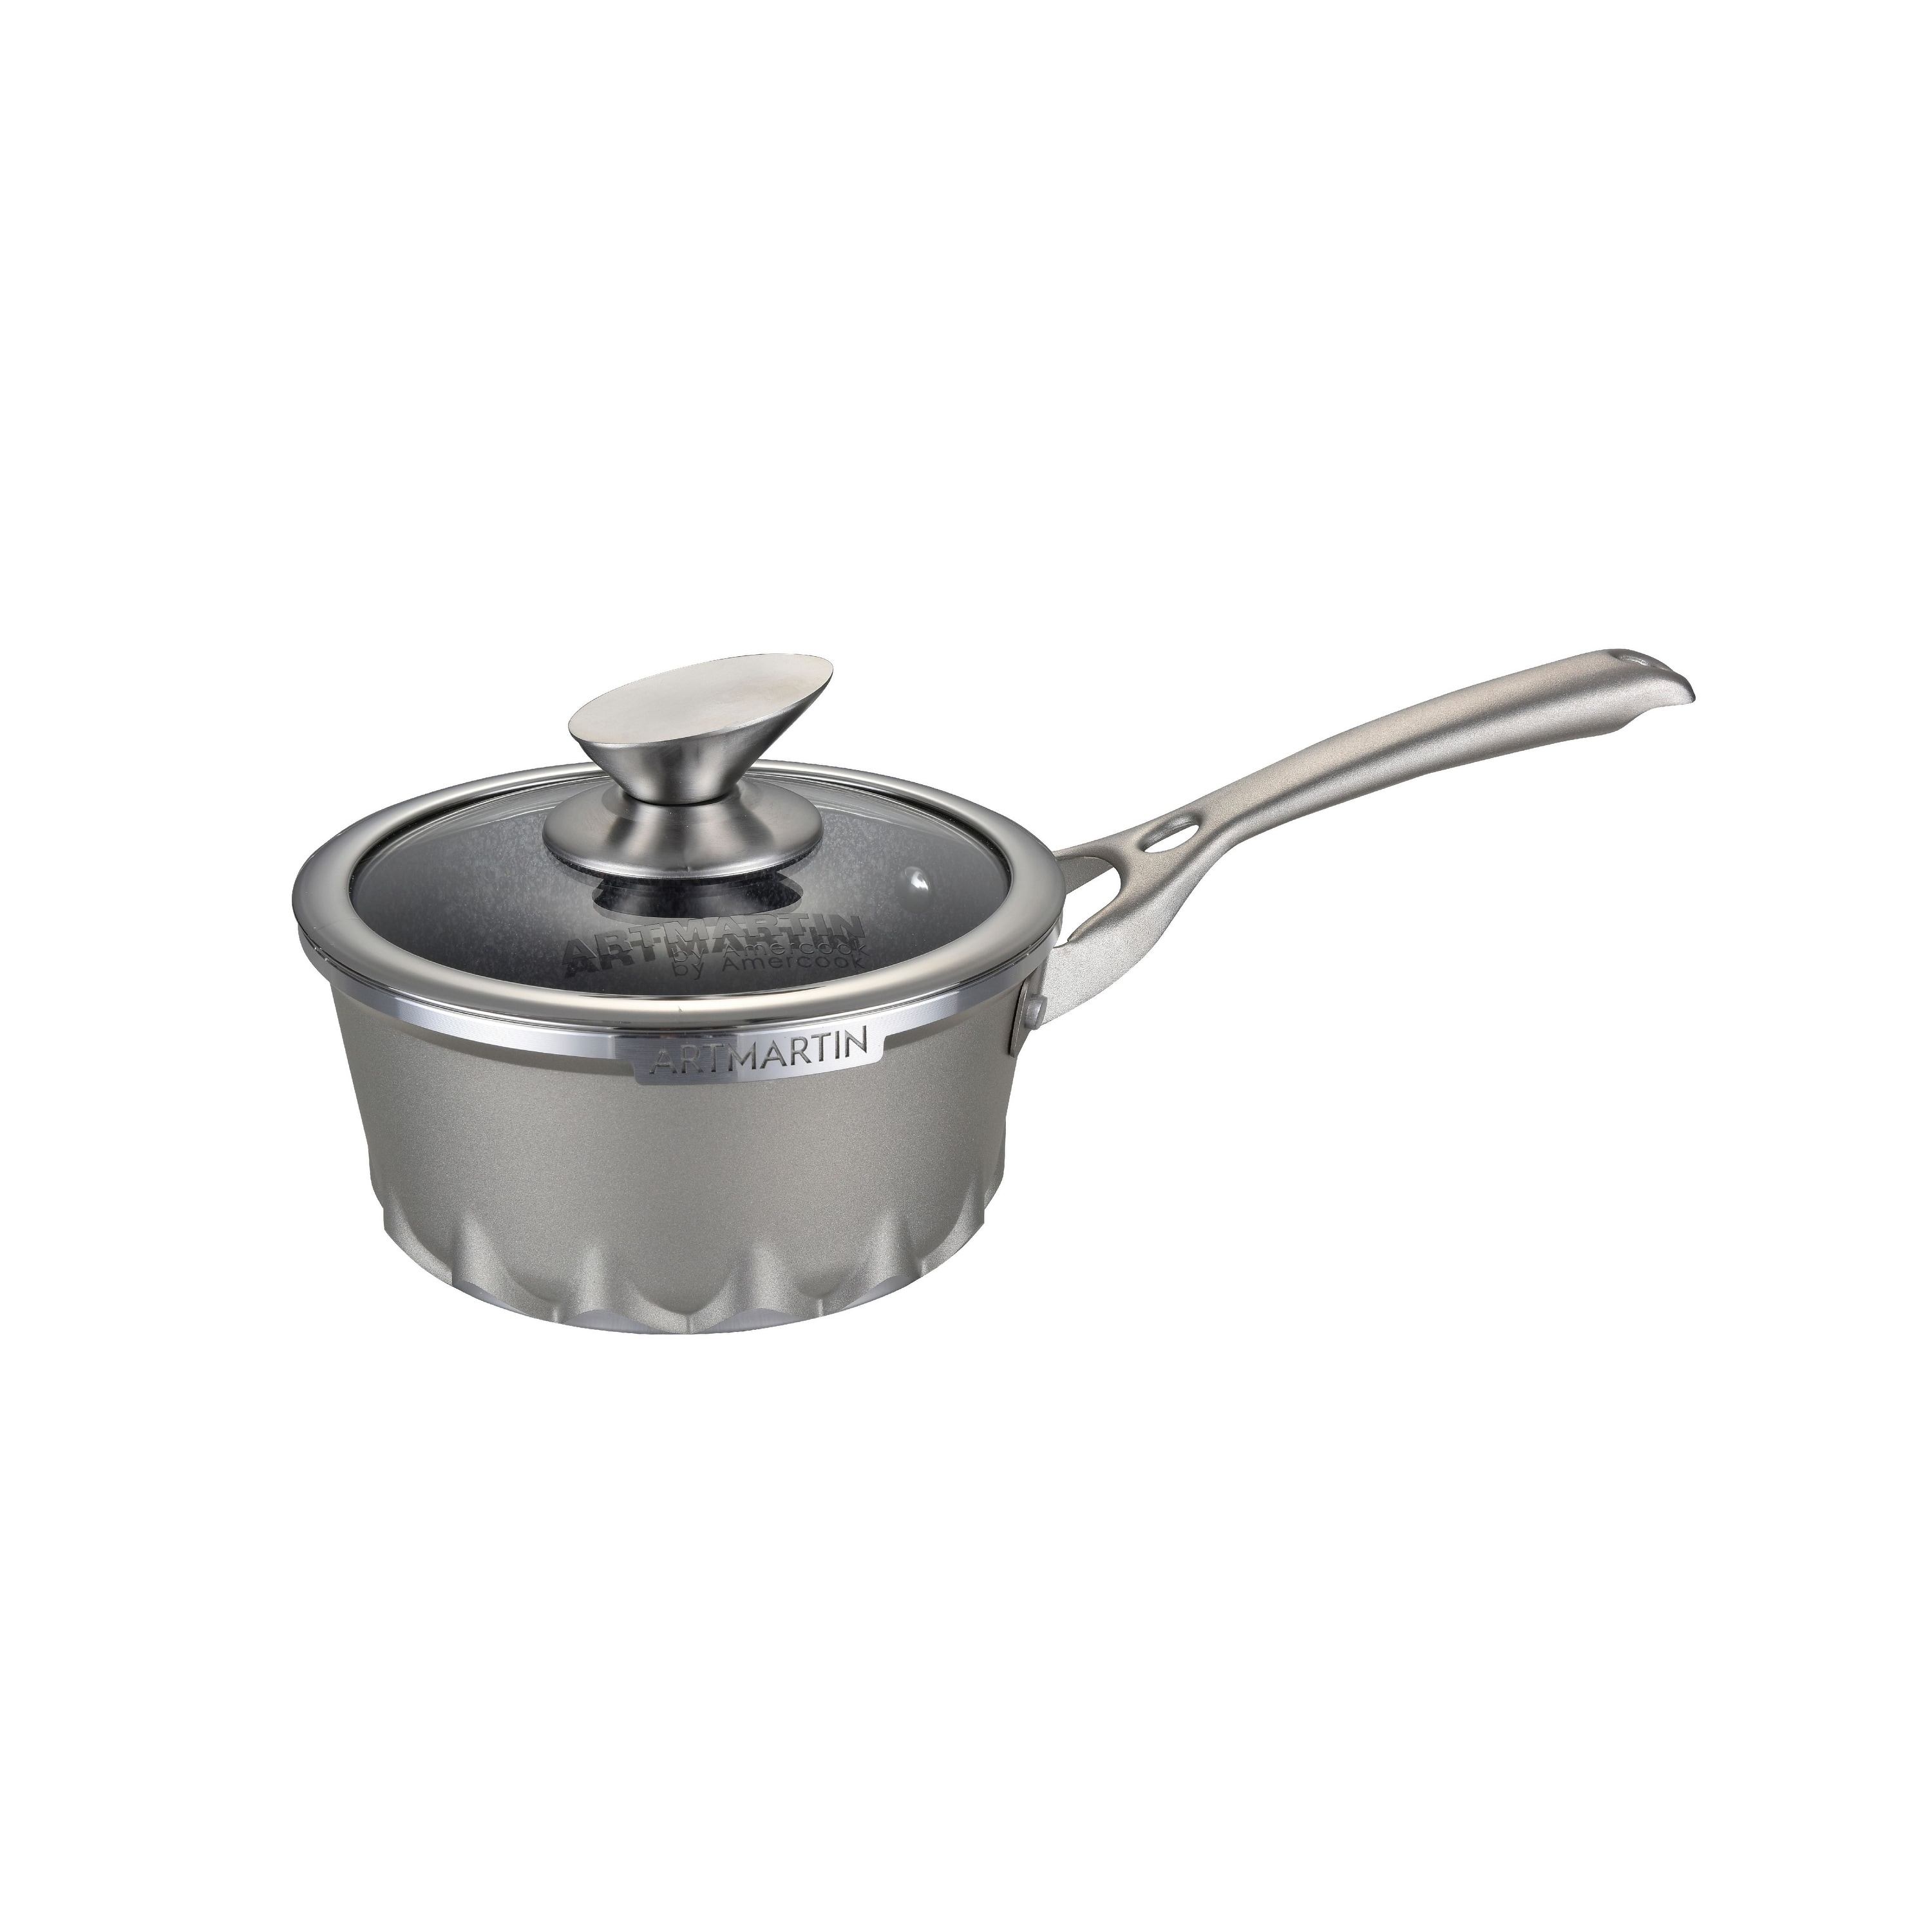 https://ak1.ostkcdn.com/images/products/is/images/direct/03793bf1ceb66100468226d2c1963bc74b02dbce/Saucepan-with-lid-Non-Stick-Ceramic-Coated-Die-Cast-Aluminum-Round-Saucepan-with-Induction-Bottom-%26-Lid-%2C6.3-inch.jpg